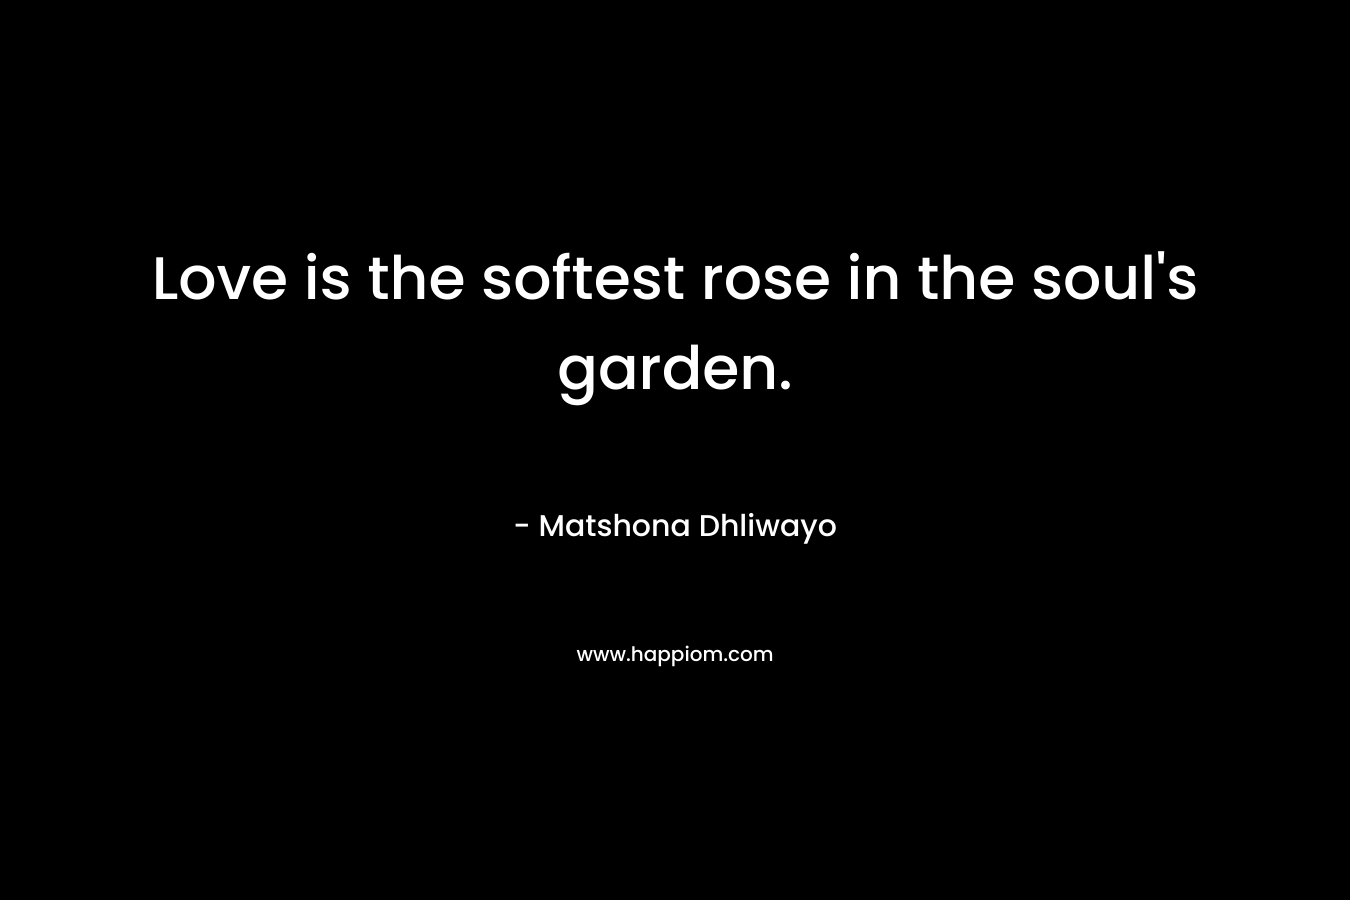 Love is the softest rose in the soul’s garden. – Matshona Dhliwayo